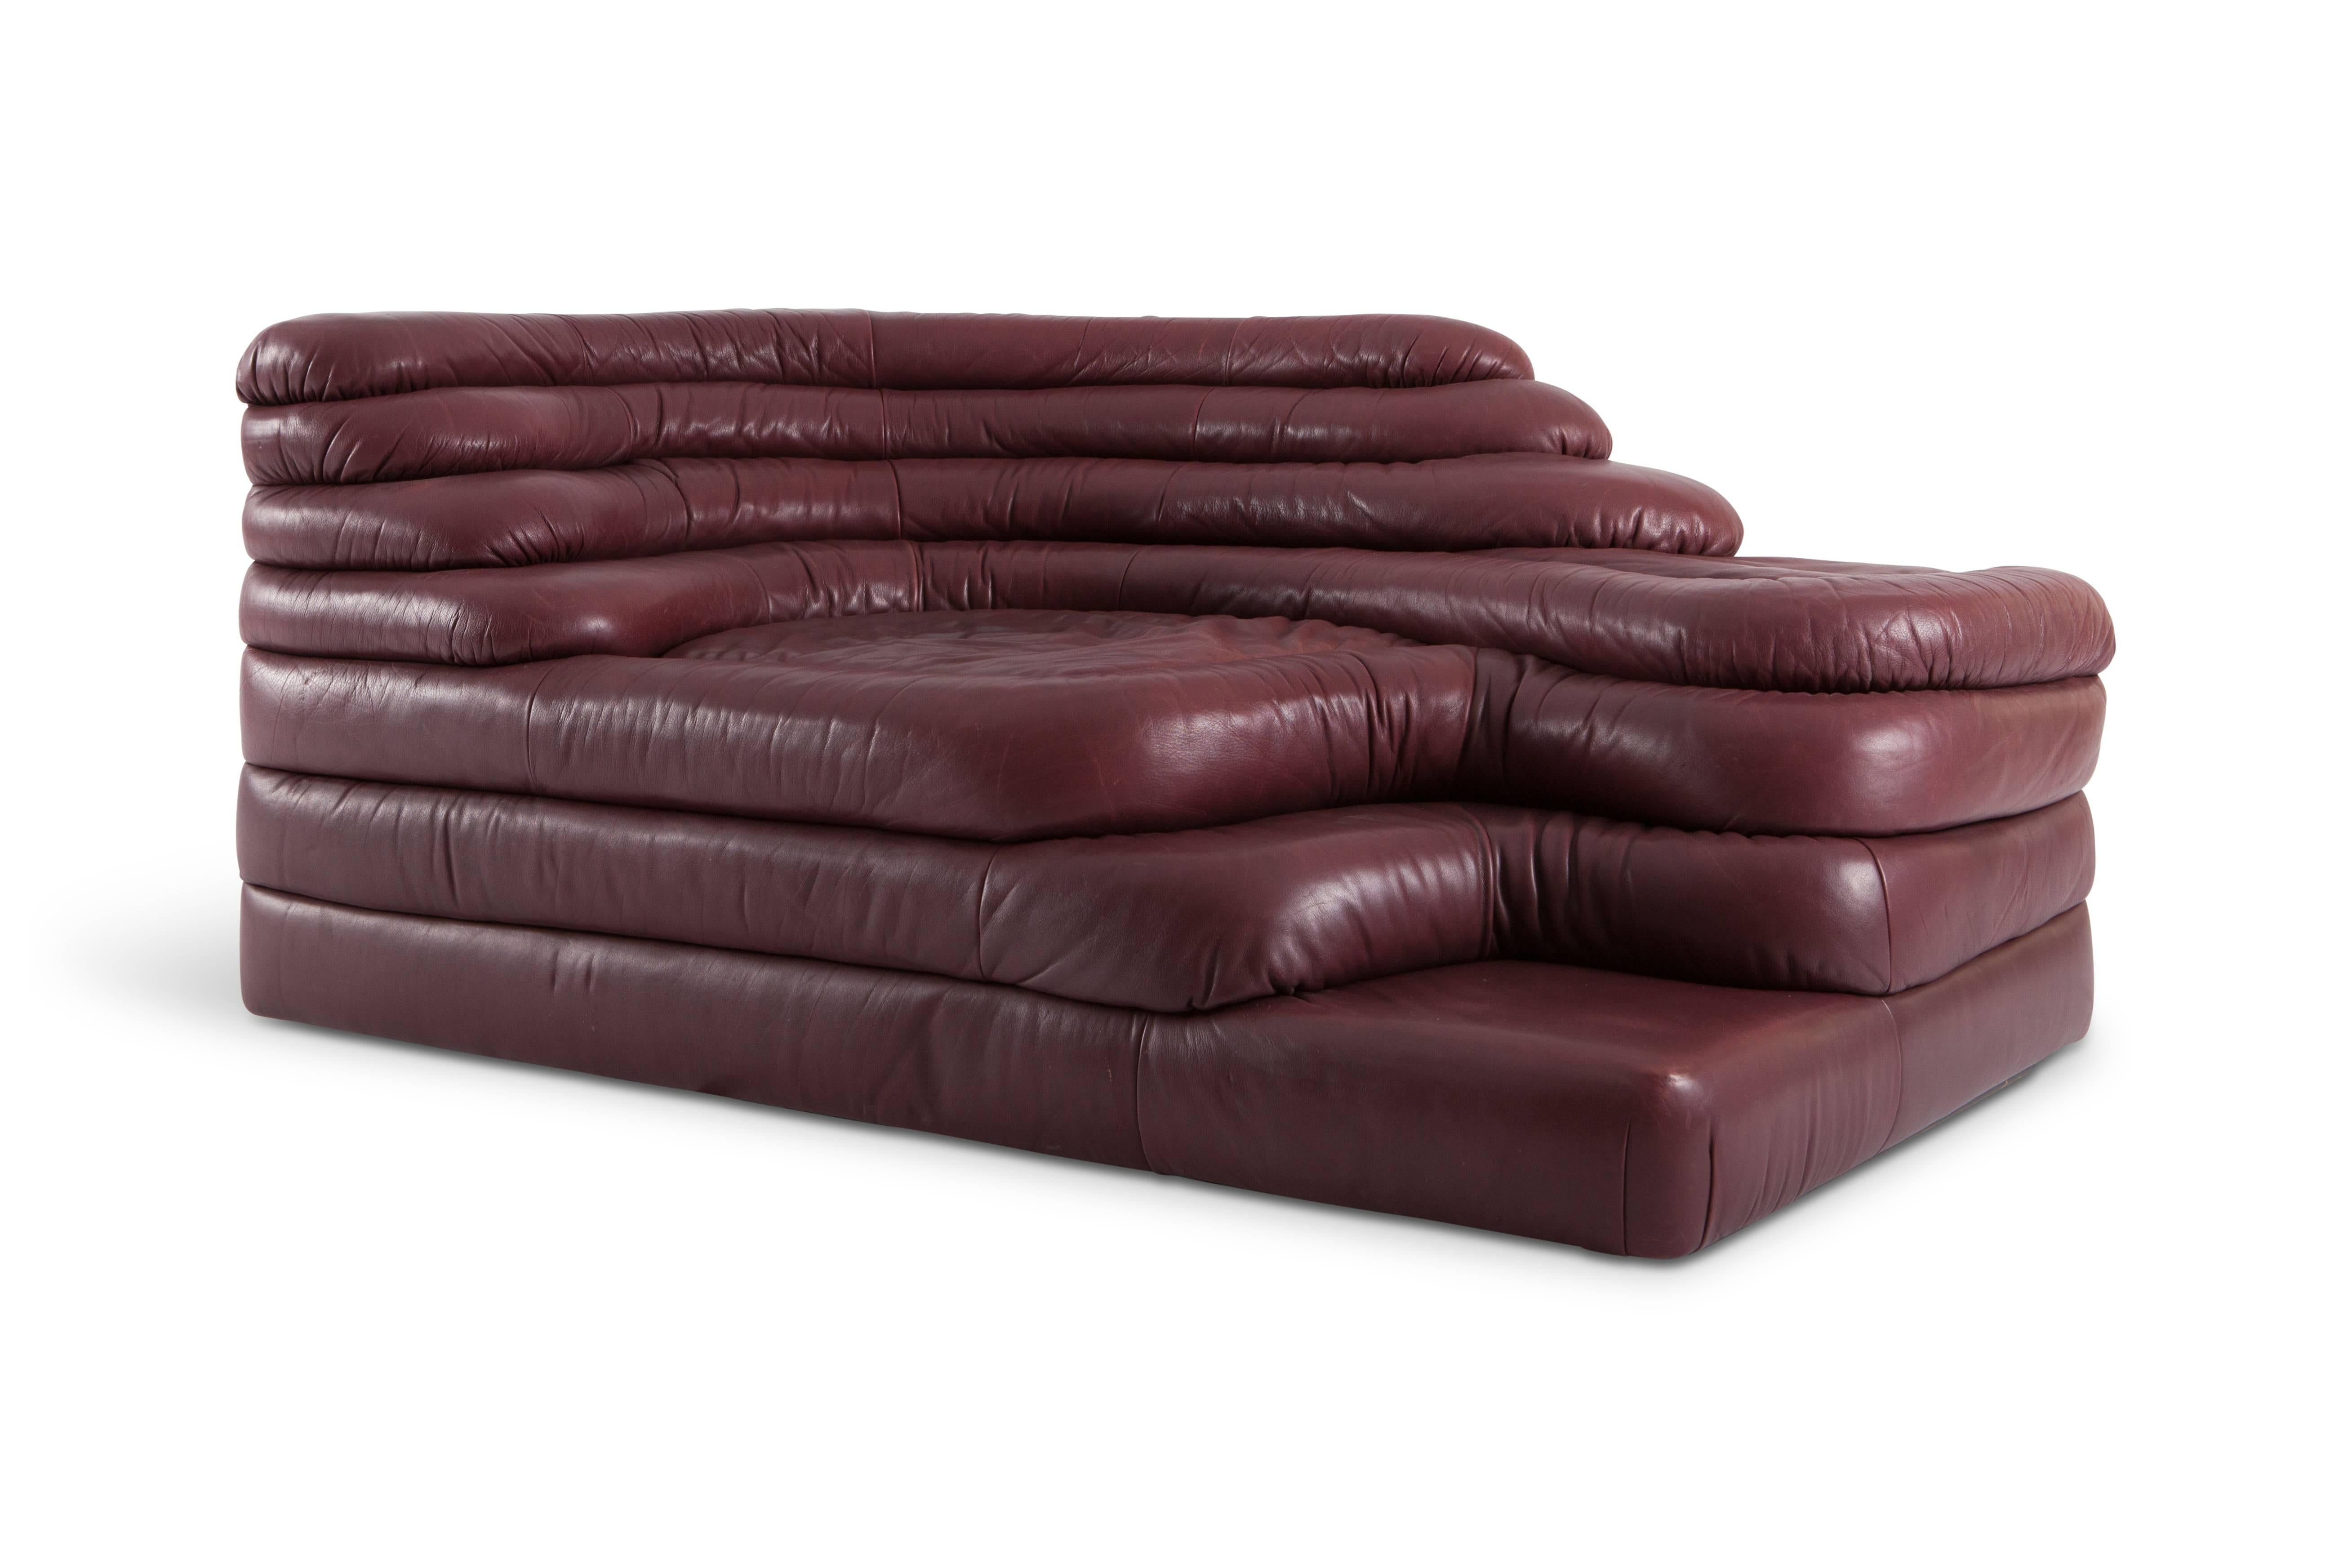 Terrazza Landscape sofa elements in original high quality burgundy leather, set of two
by Ubald Klug for De Sede, Switzerland, 1970s. 

De Sede is well-known for making high end quality sofas with many iconic designs on their pedigree.
This